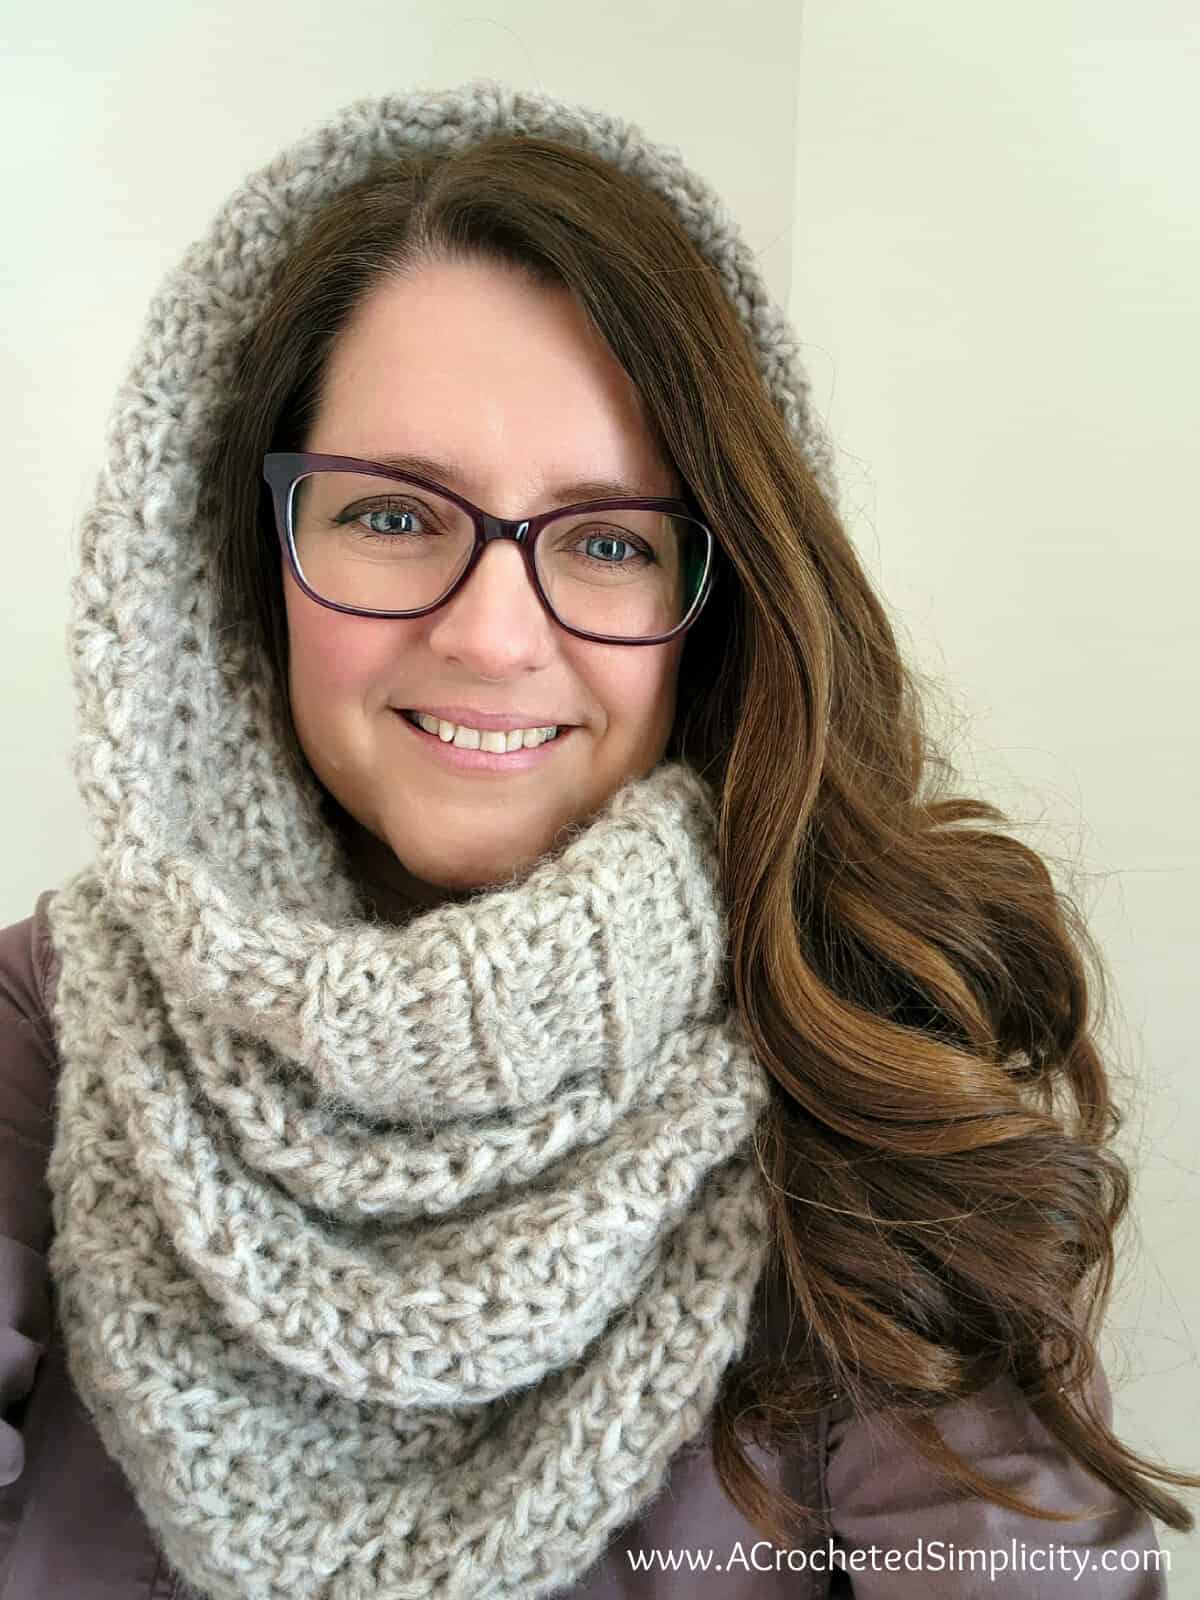 How To Make 3 Sizes Hooded Scarf / DIY Scarf / Beginner Tutorial